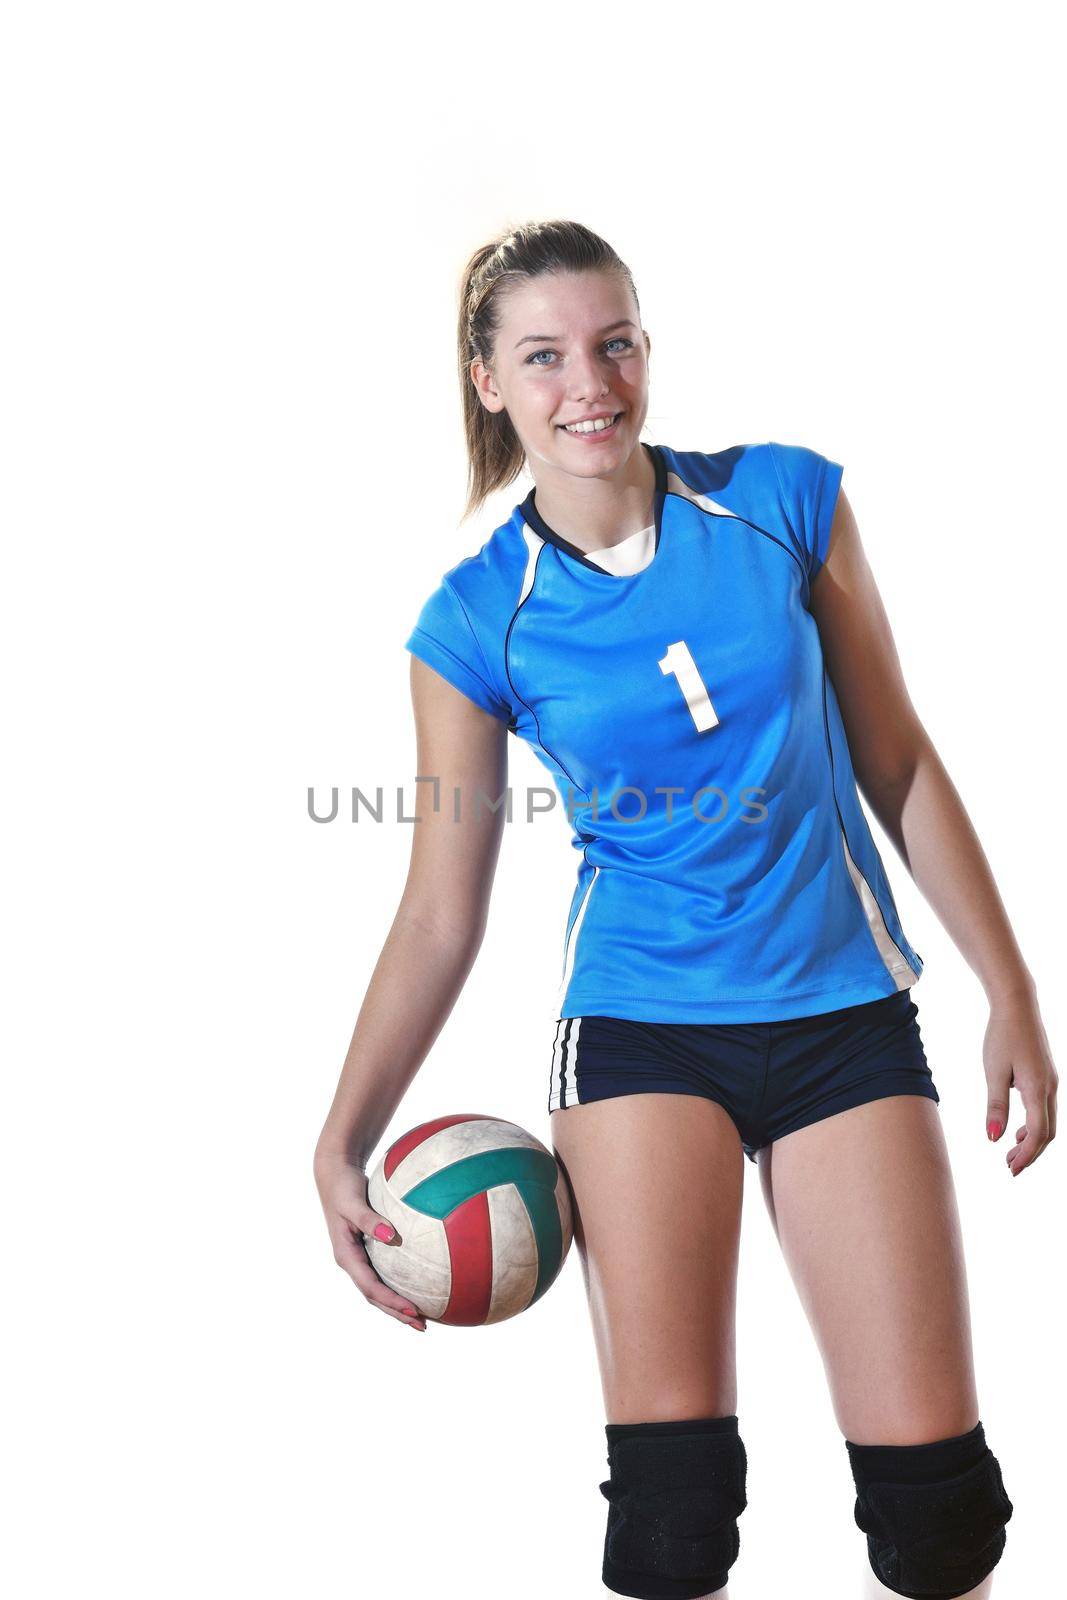 volleyball game sport with neautoful young girl oslated onver white background